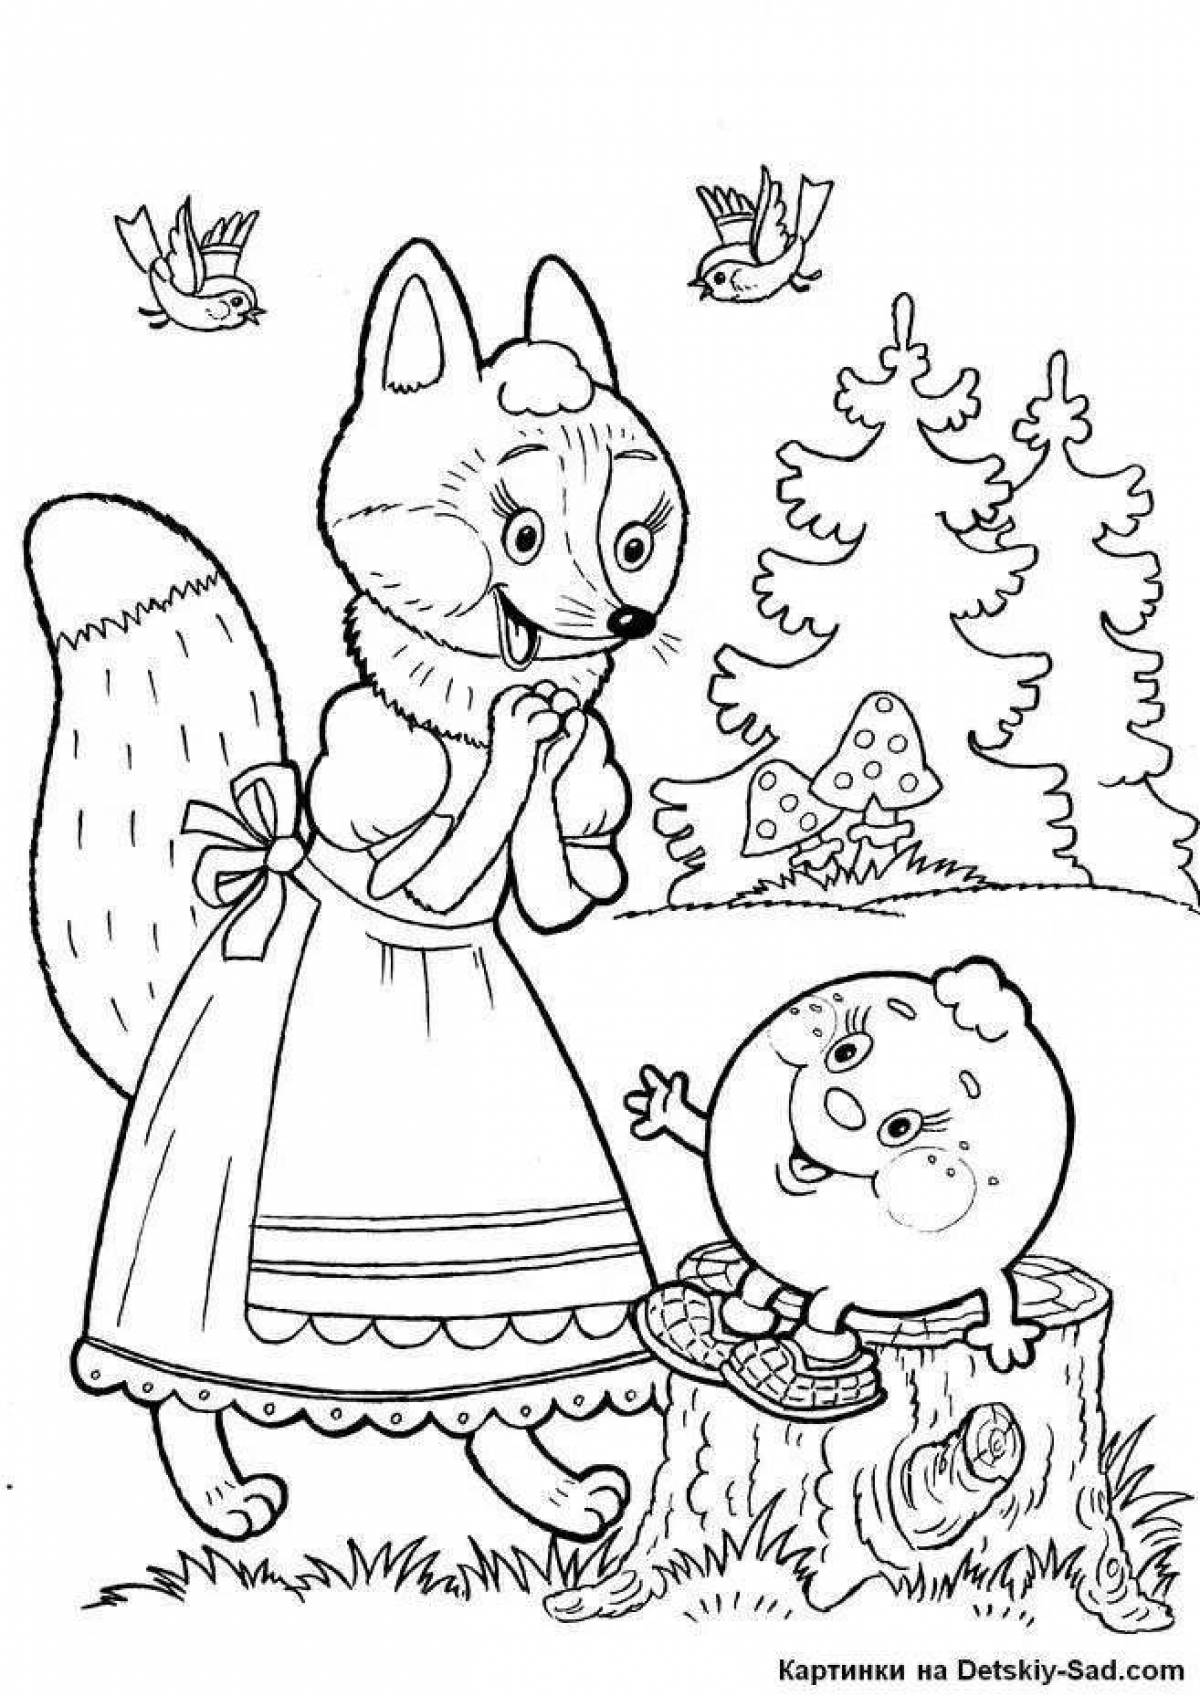 Adorable kolobok coloring book for children 4-5 years old